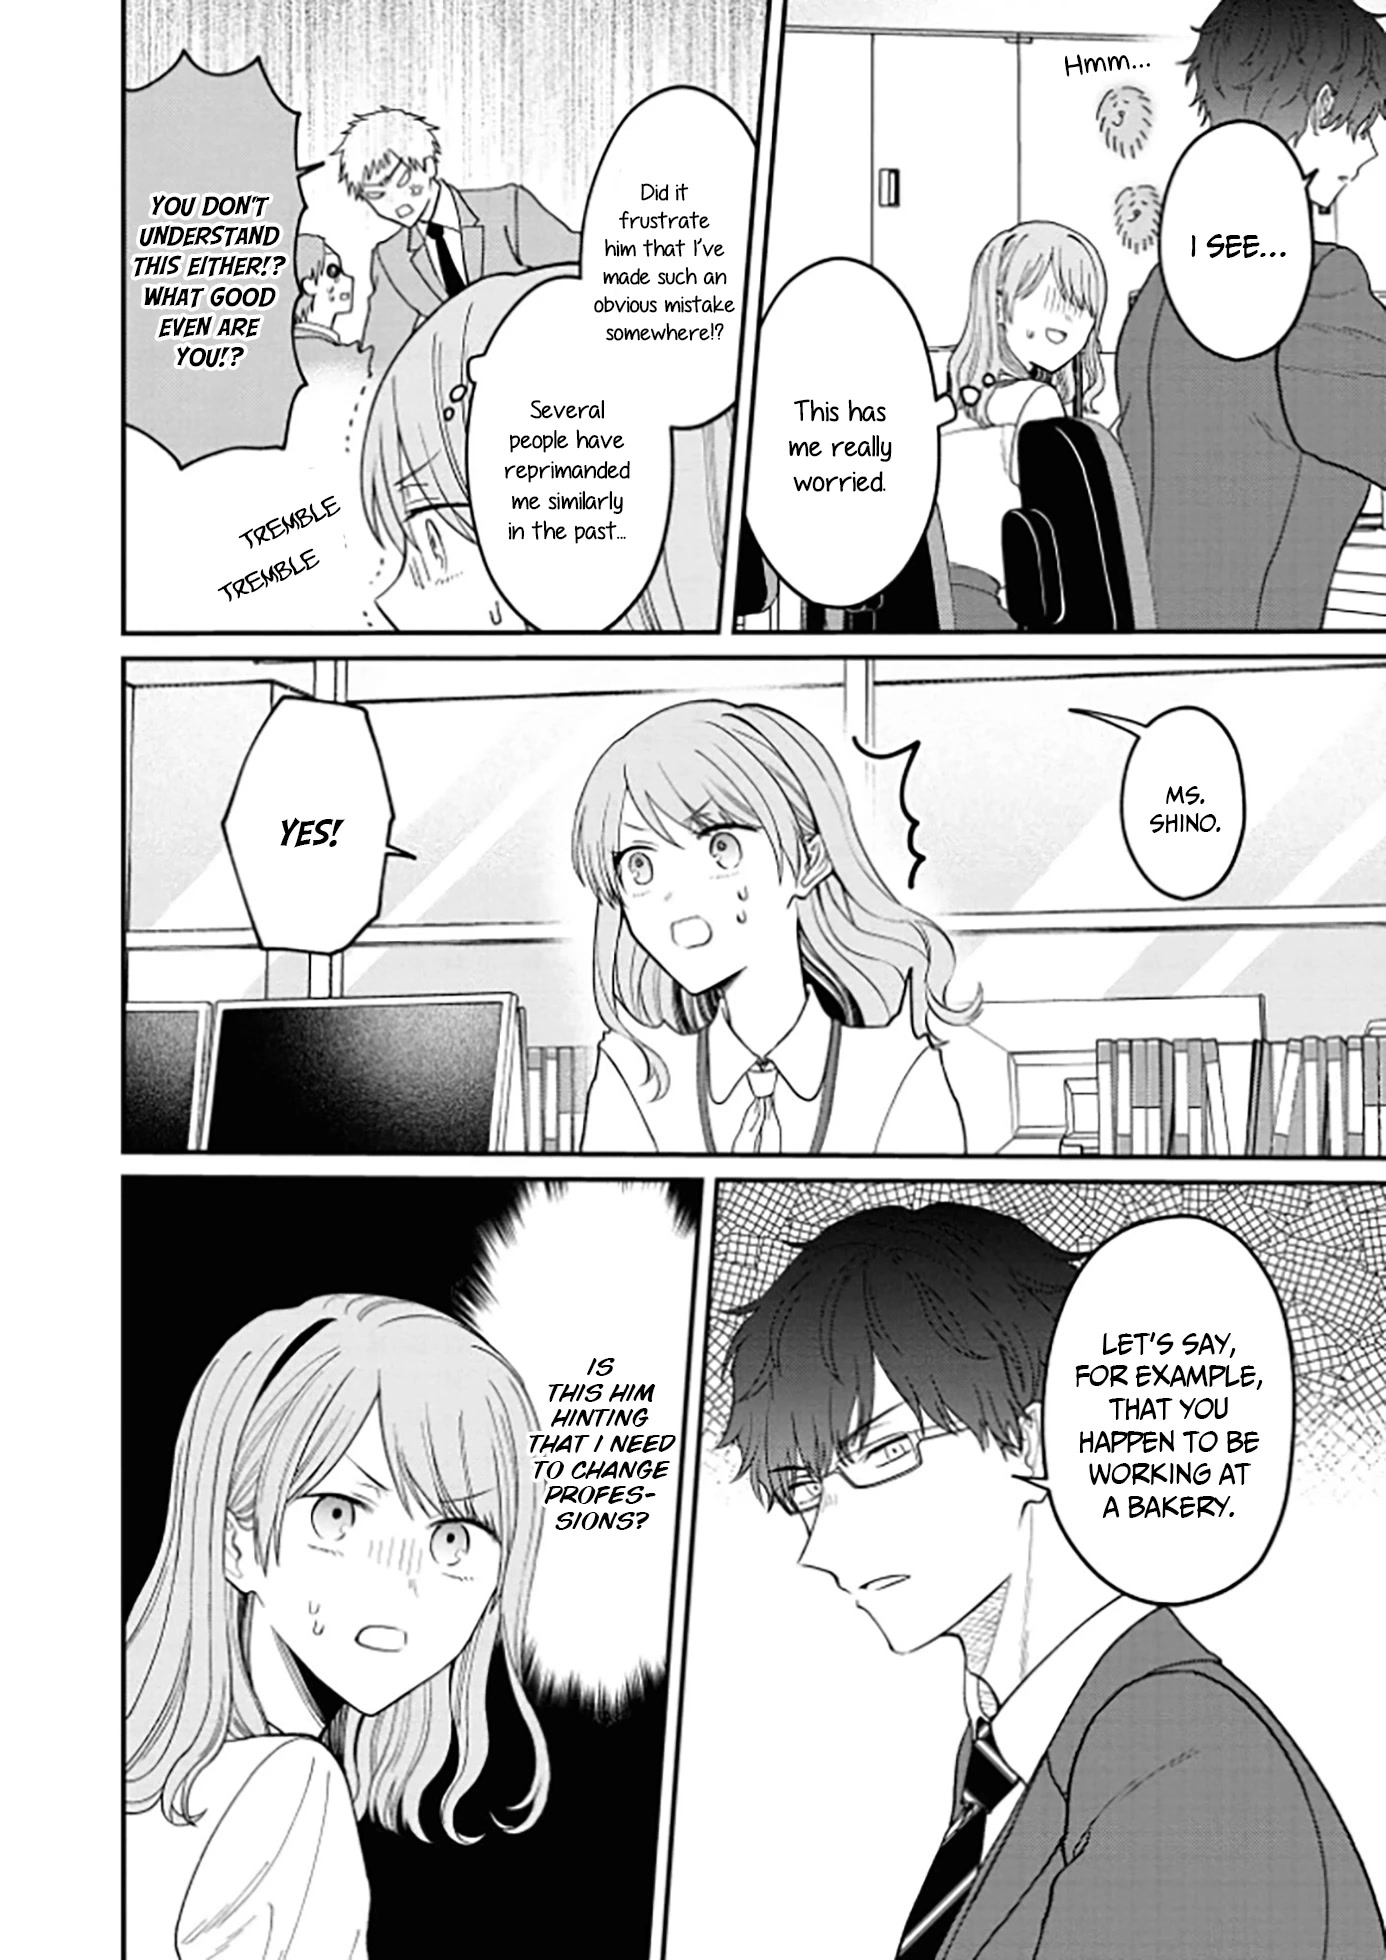 The New-Hire Who Could "Read" Emotions and the Unsociable Senpai - chapter 7 - #2